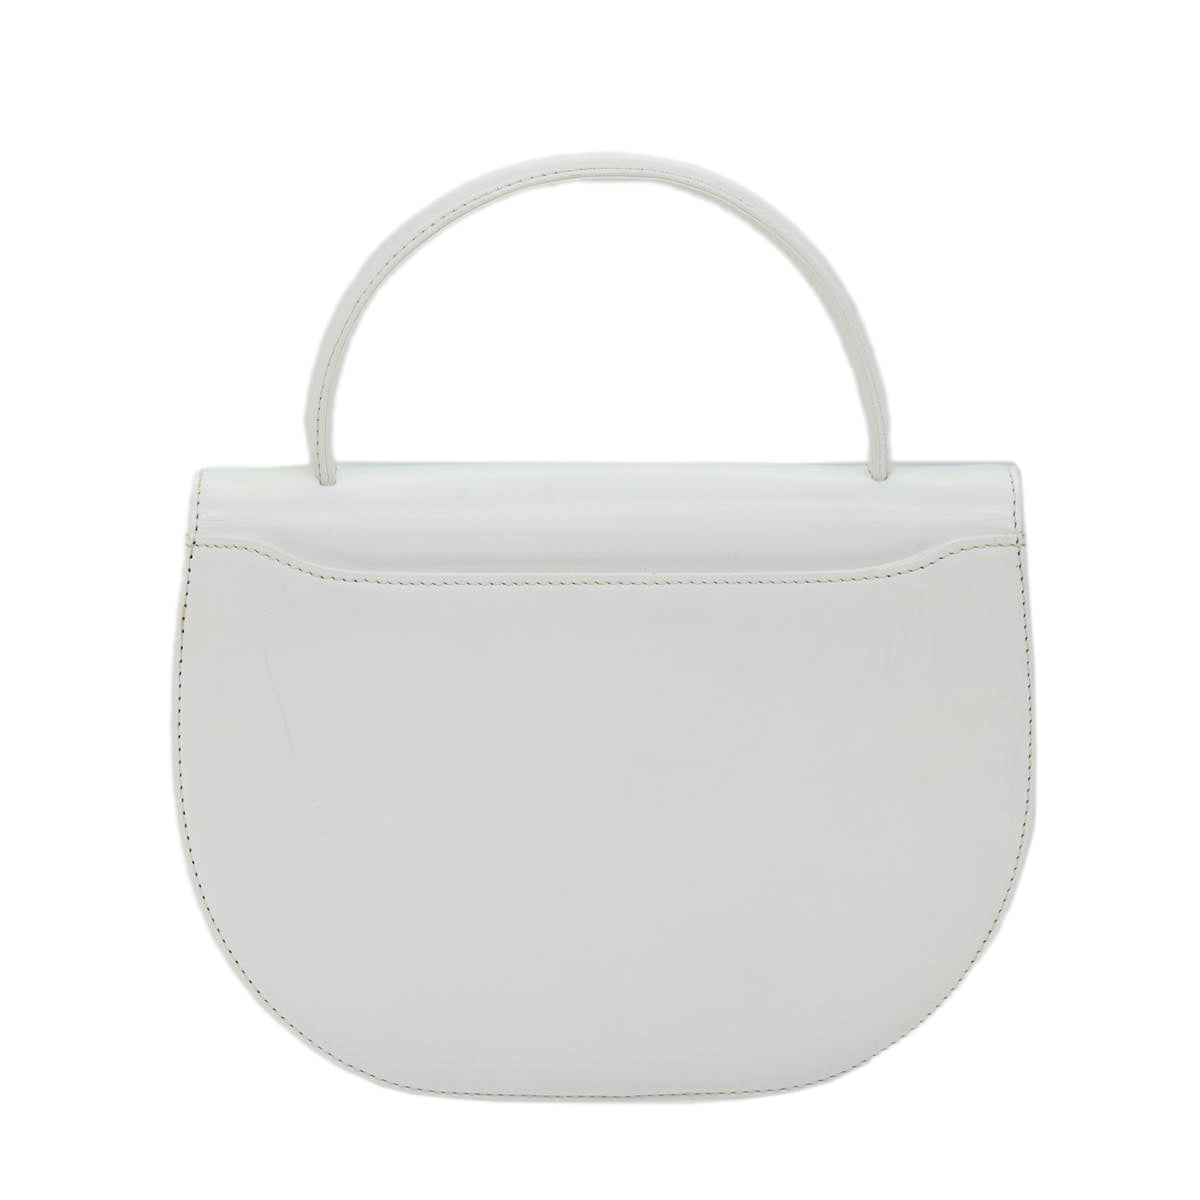 GIVENCHY Hand Bag Leather White Auth 69527